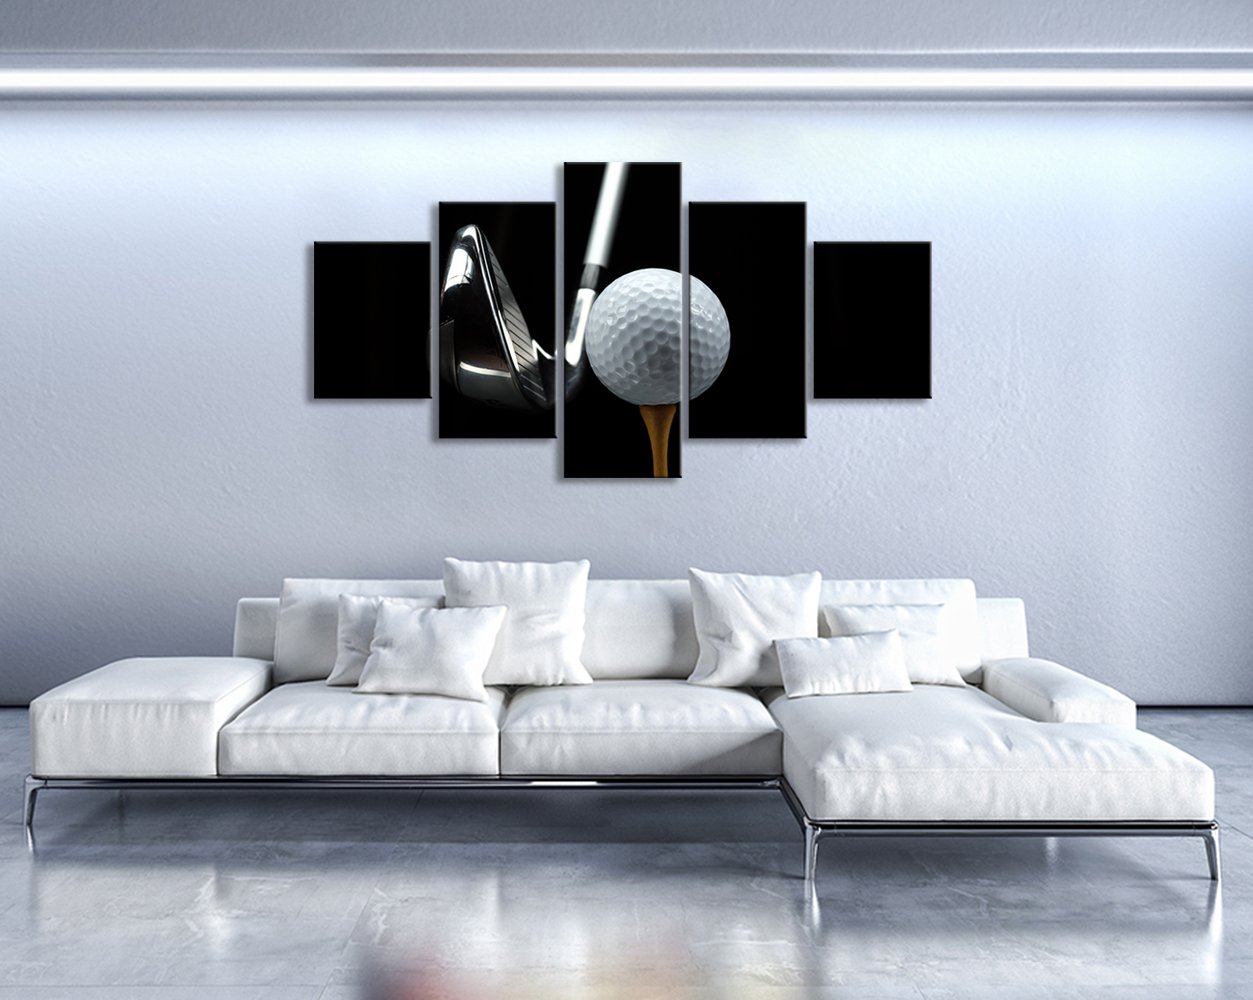 Golf Enthusiast: How to Decorate a Living Room with Golf Wall Art